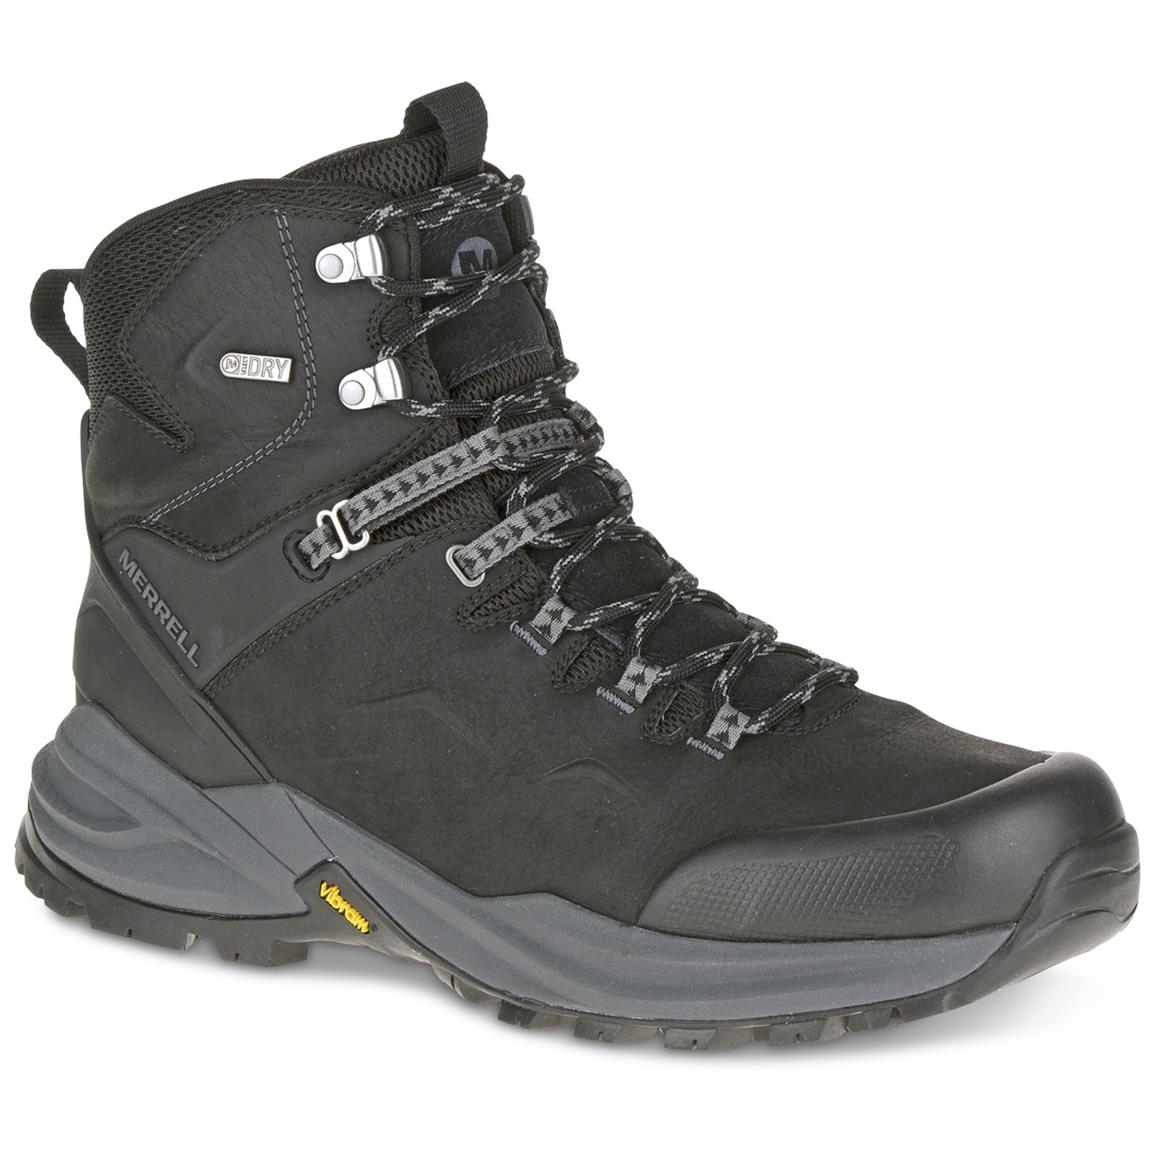 Merrell Men's Phaserbound Hiking Boots, Waterproof - 669946, Hiking ...